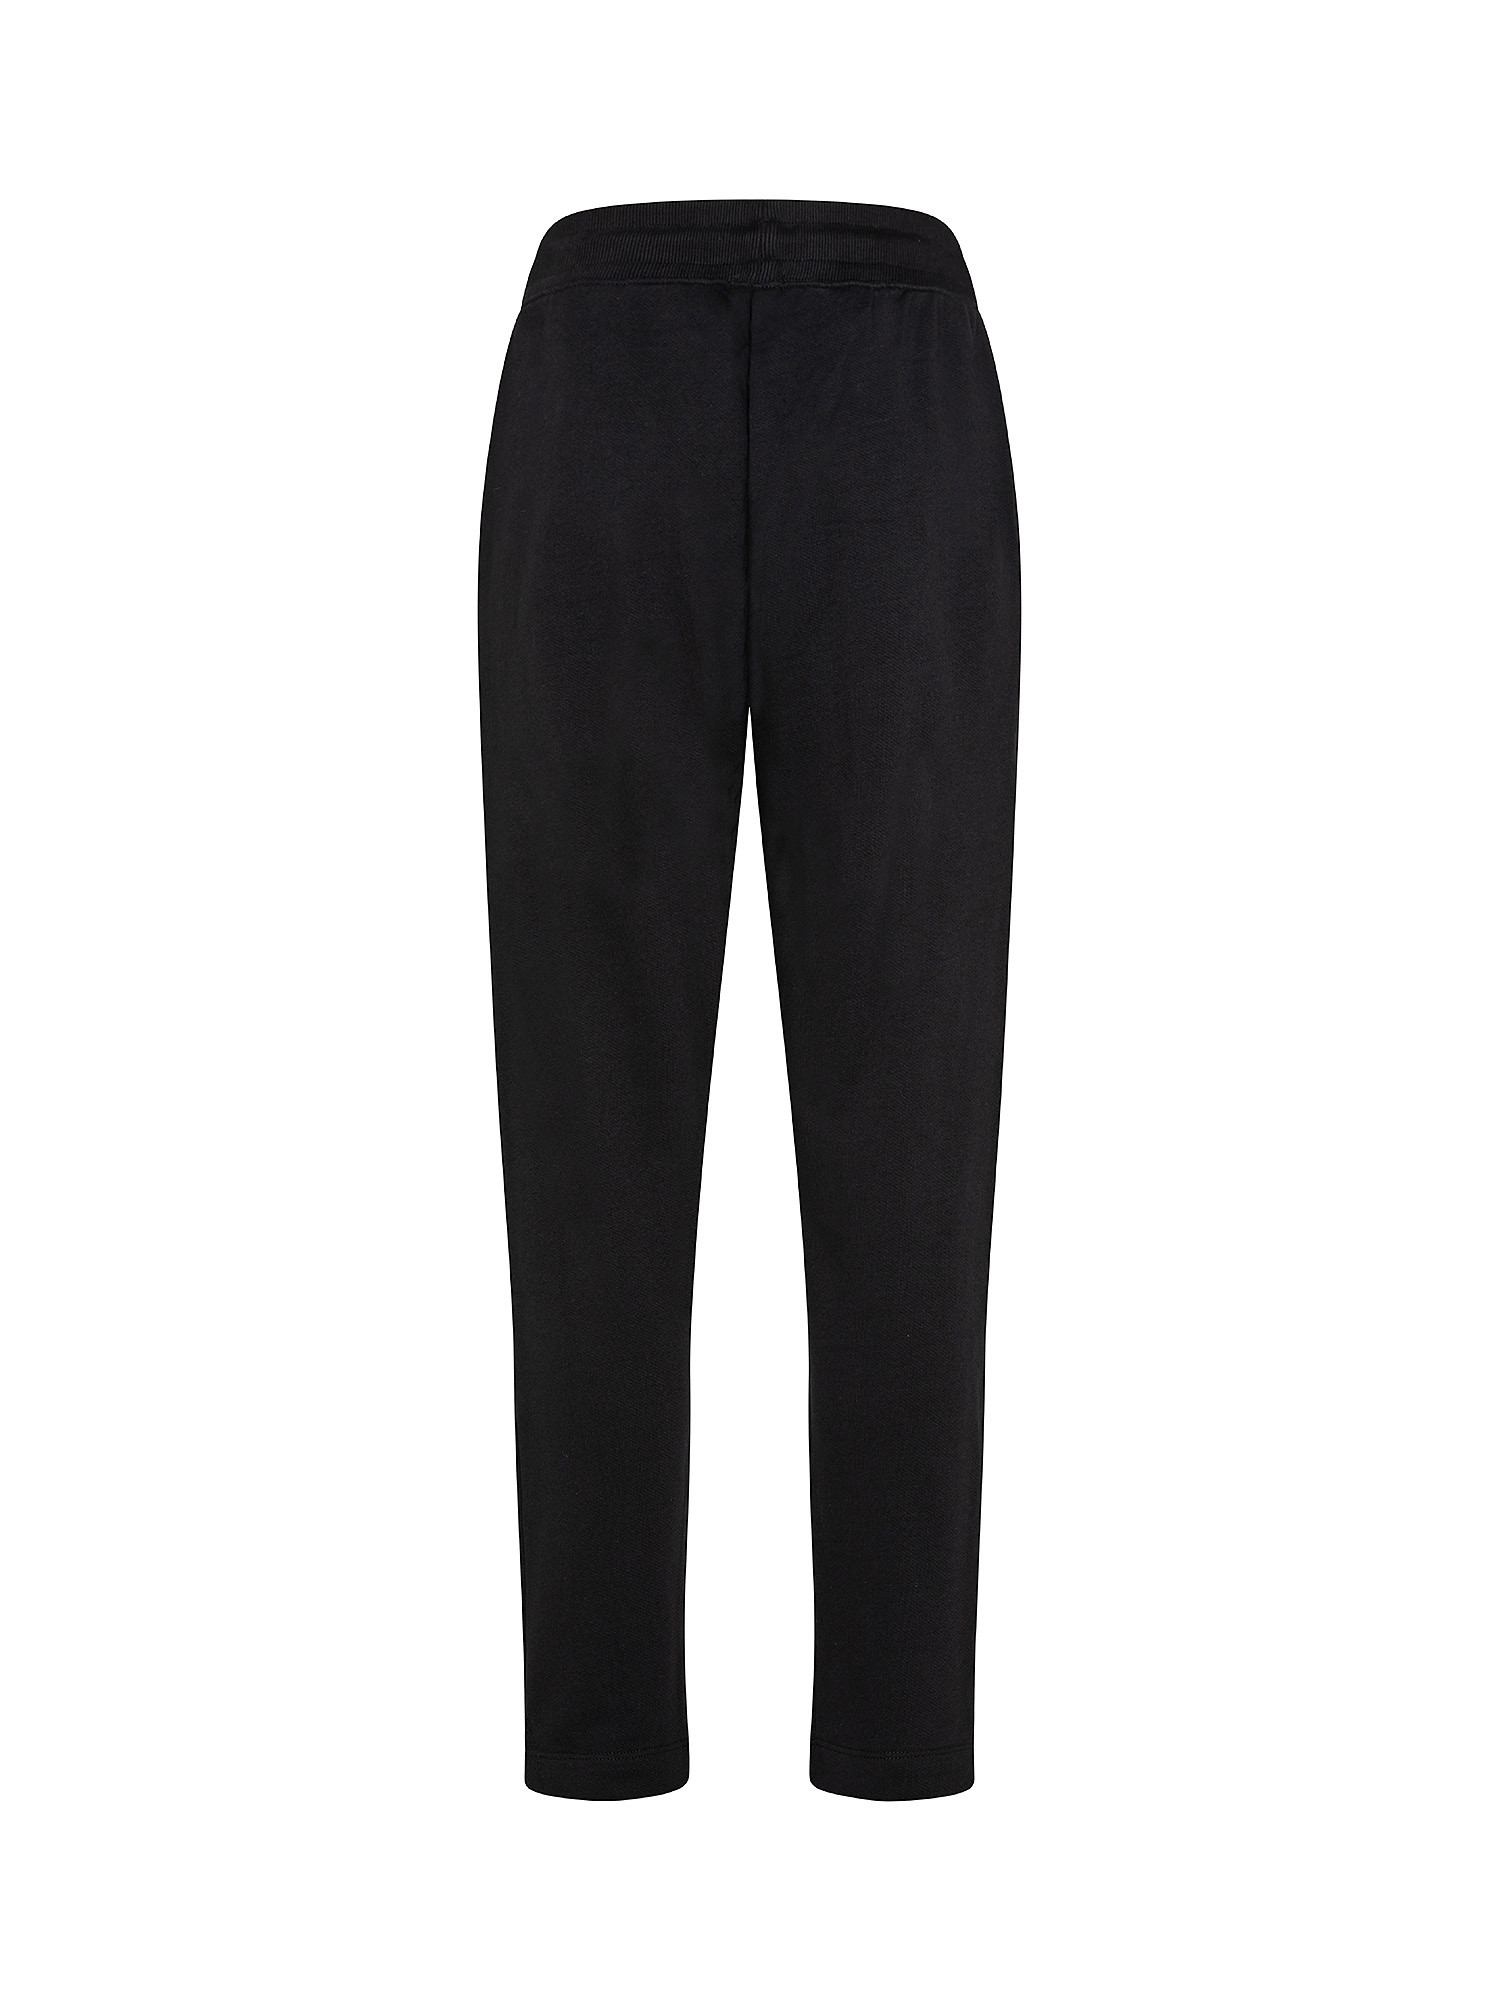 Calista joggers trousers, Black, large image number 1